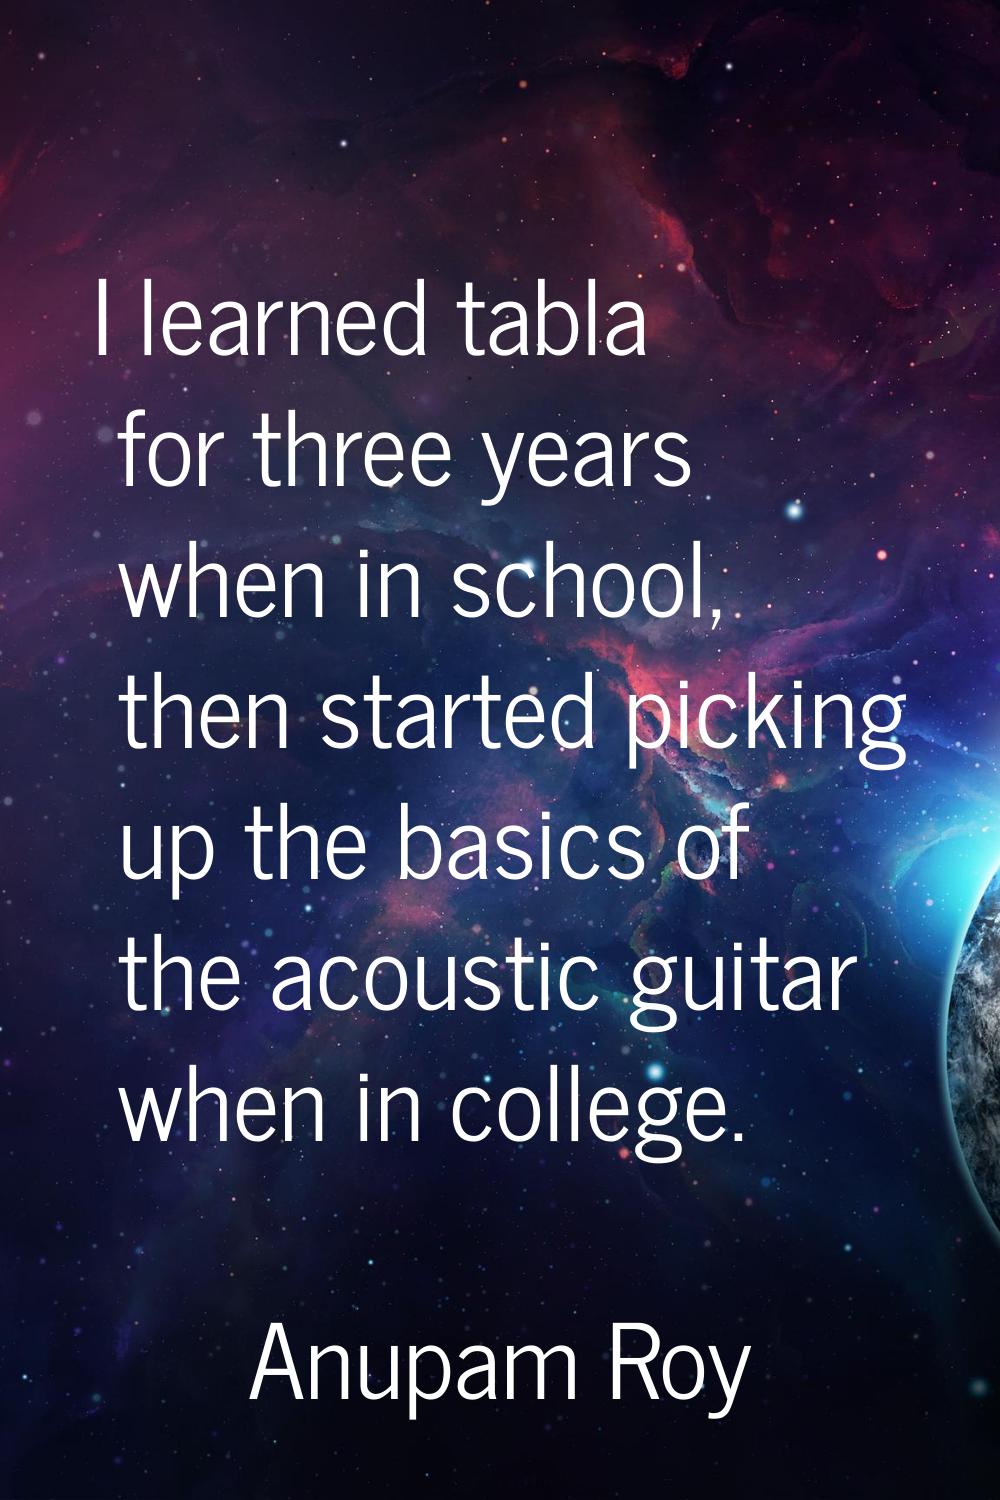 I learned tabla for three years when in school, then started picking up the basics of the acoustic 